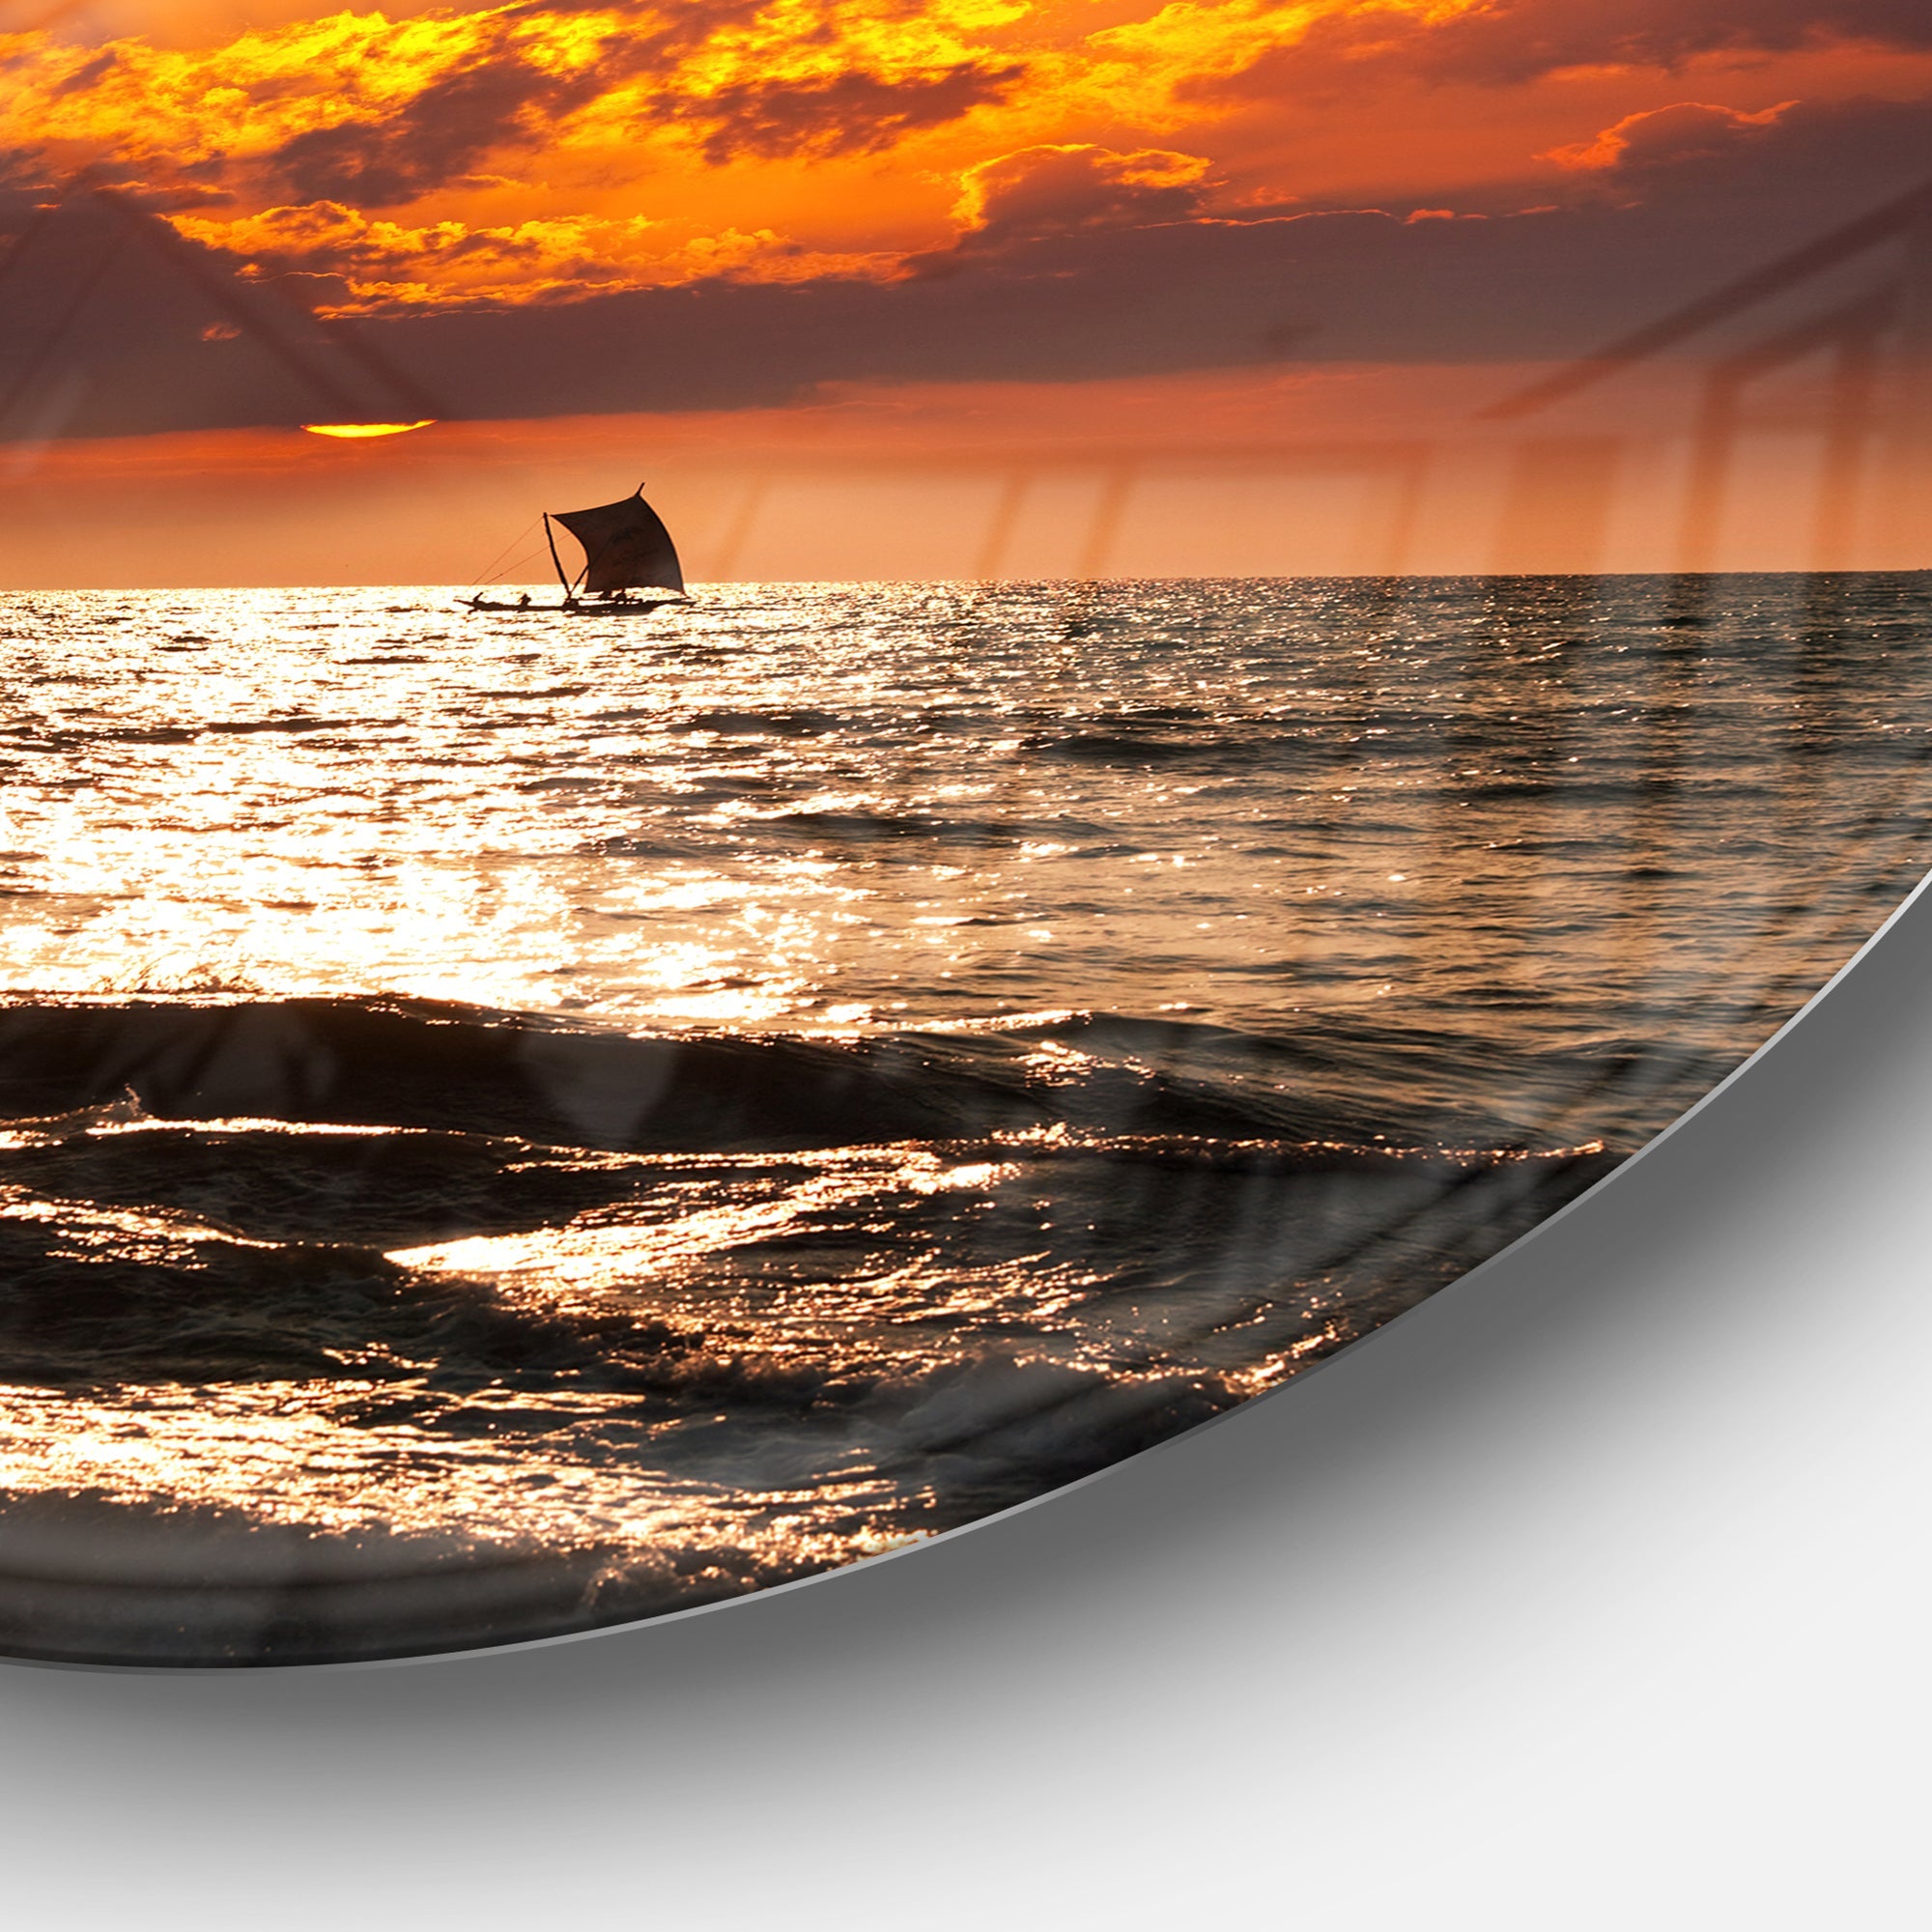 Sunset Beach with Distant Sail Boat Seashore Oversized Metal Circle Wall Art